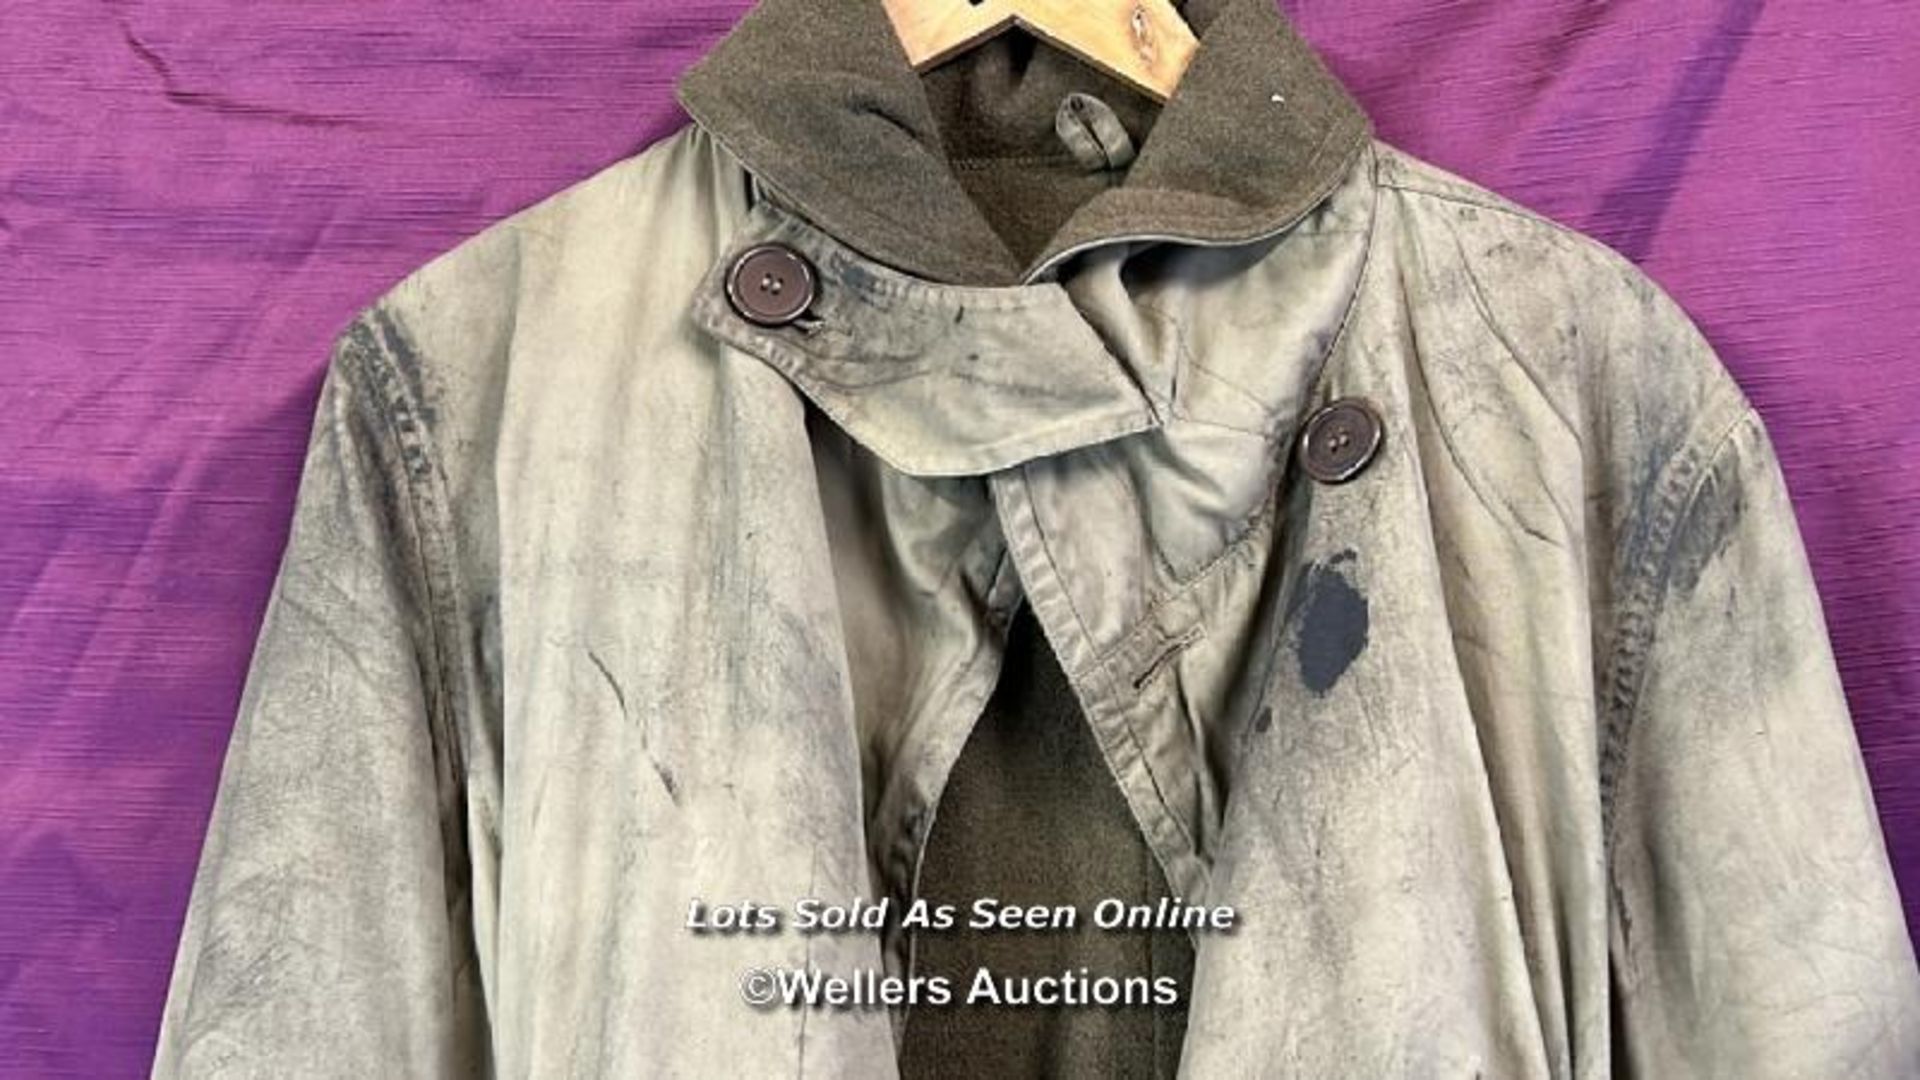 KHAKI MILITARY JACKET WORLD WAR TWO STYLE, USED IN THE 2014 FILM 'FURY' - Image 2 of 5